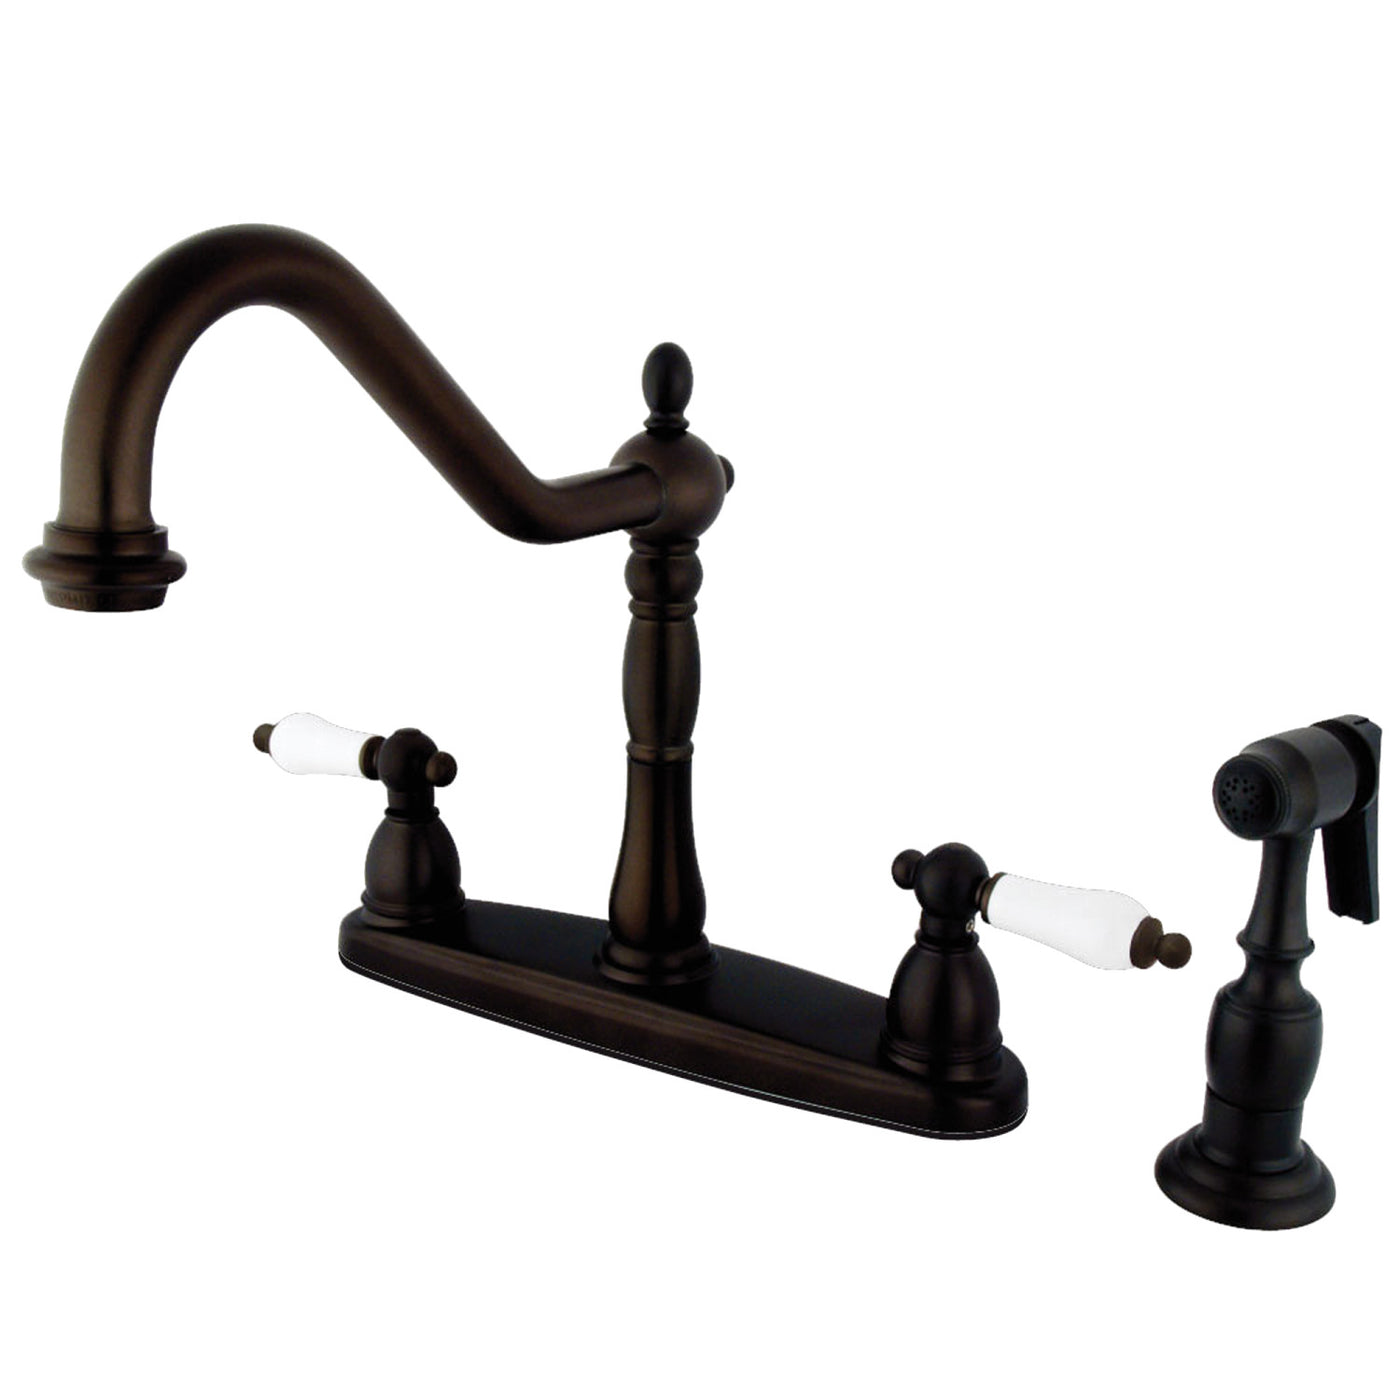 Elements of Design EB1755PLBS Centerset Kitchen Faucet with Brass Sprayer, Oil Rubbed Bronze